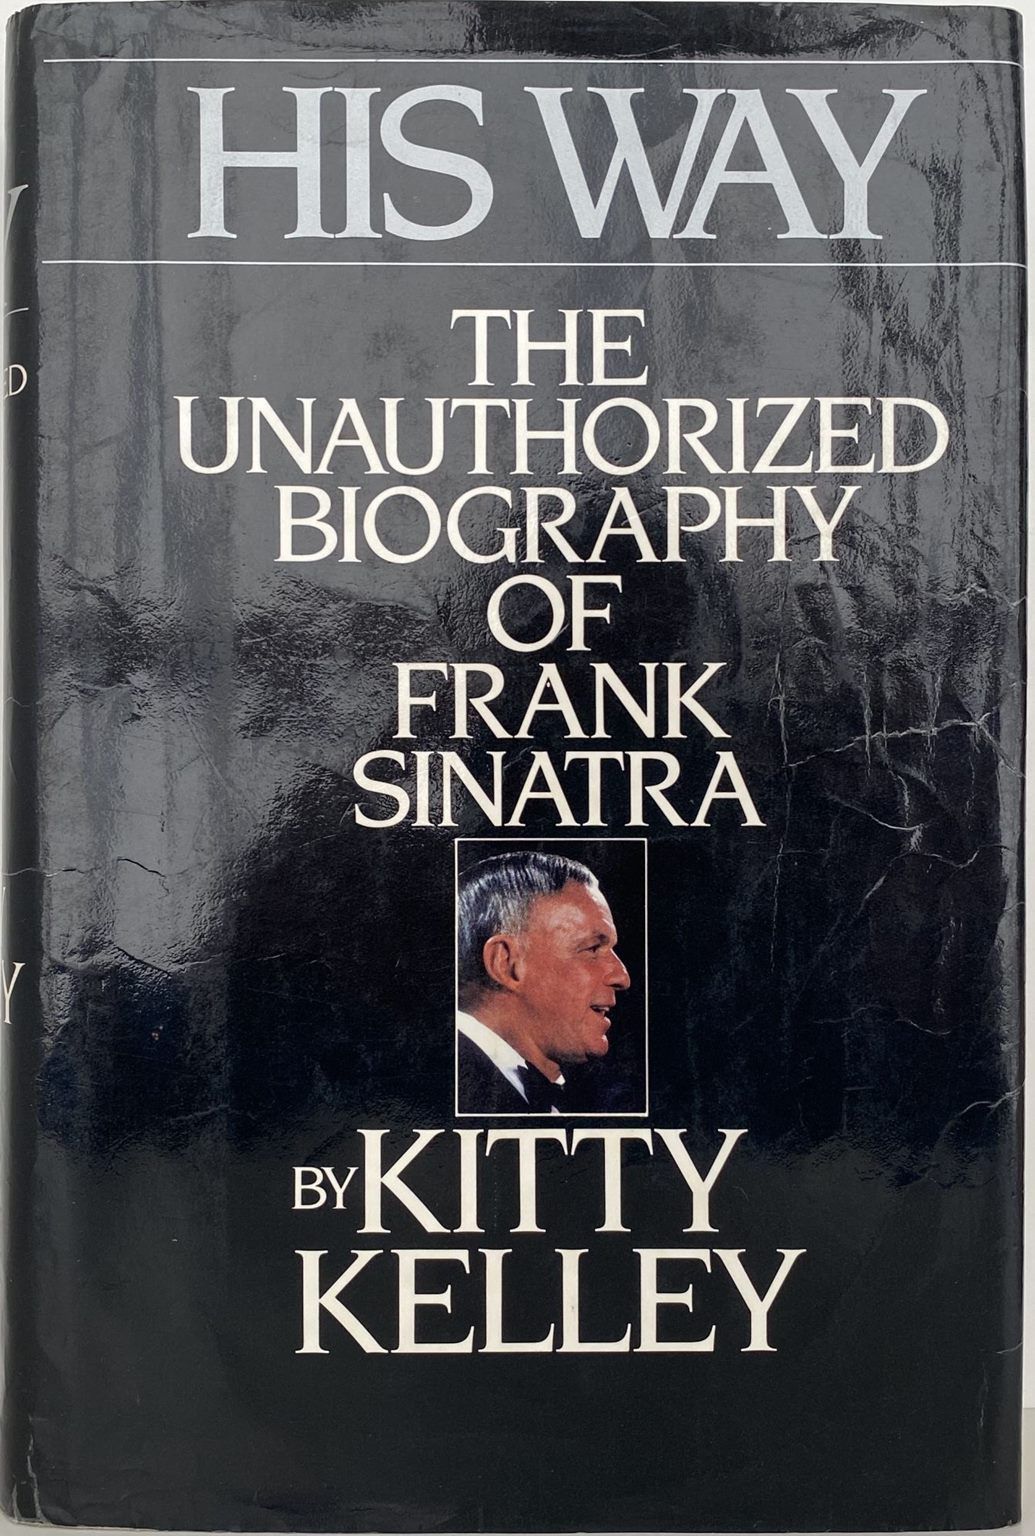 HIS WAY: The Unauthorized Biography of Frank Sinatra